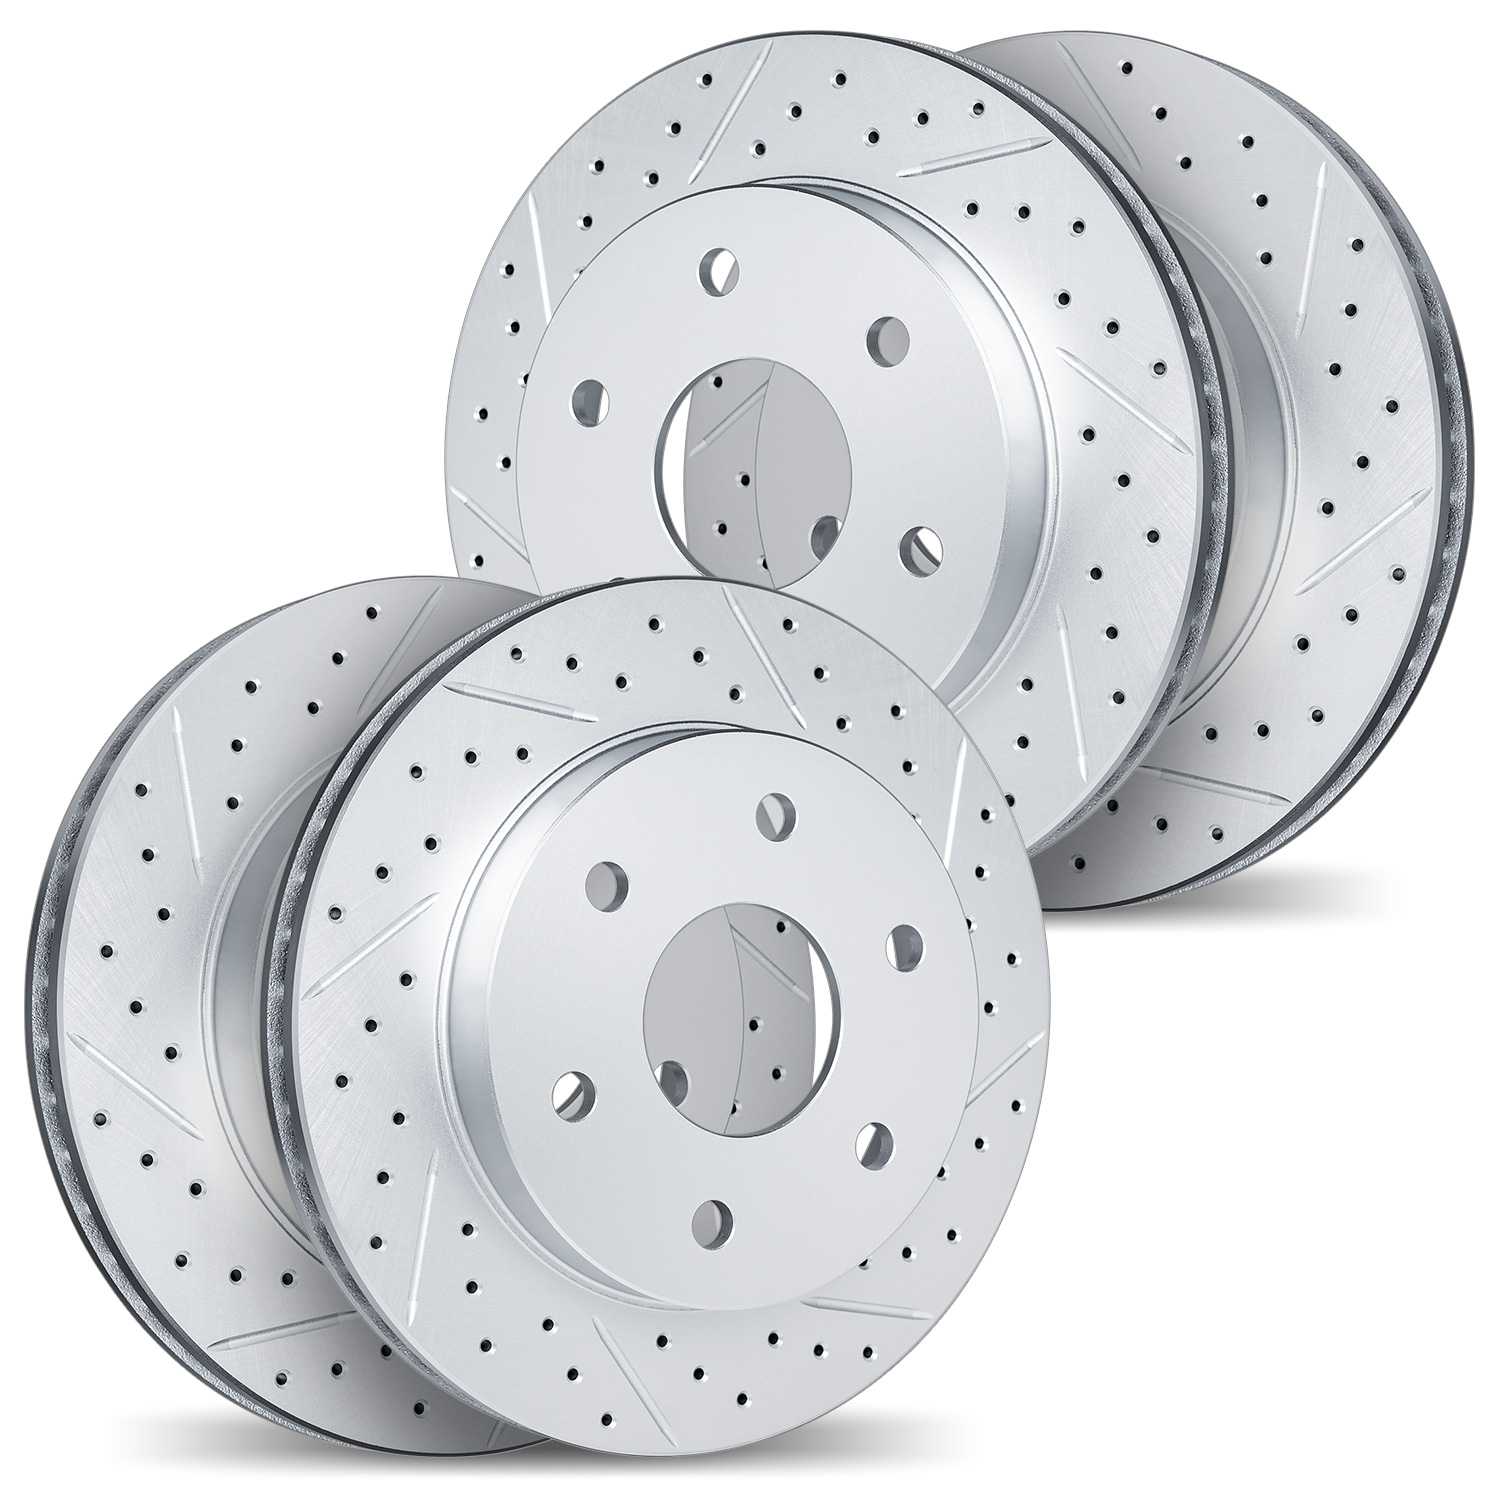 2004-47058 Geoperformance Drilled/Slotted Brake Rotors, 2006-2009 GM, Position: Front and Rear